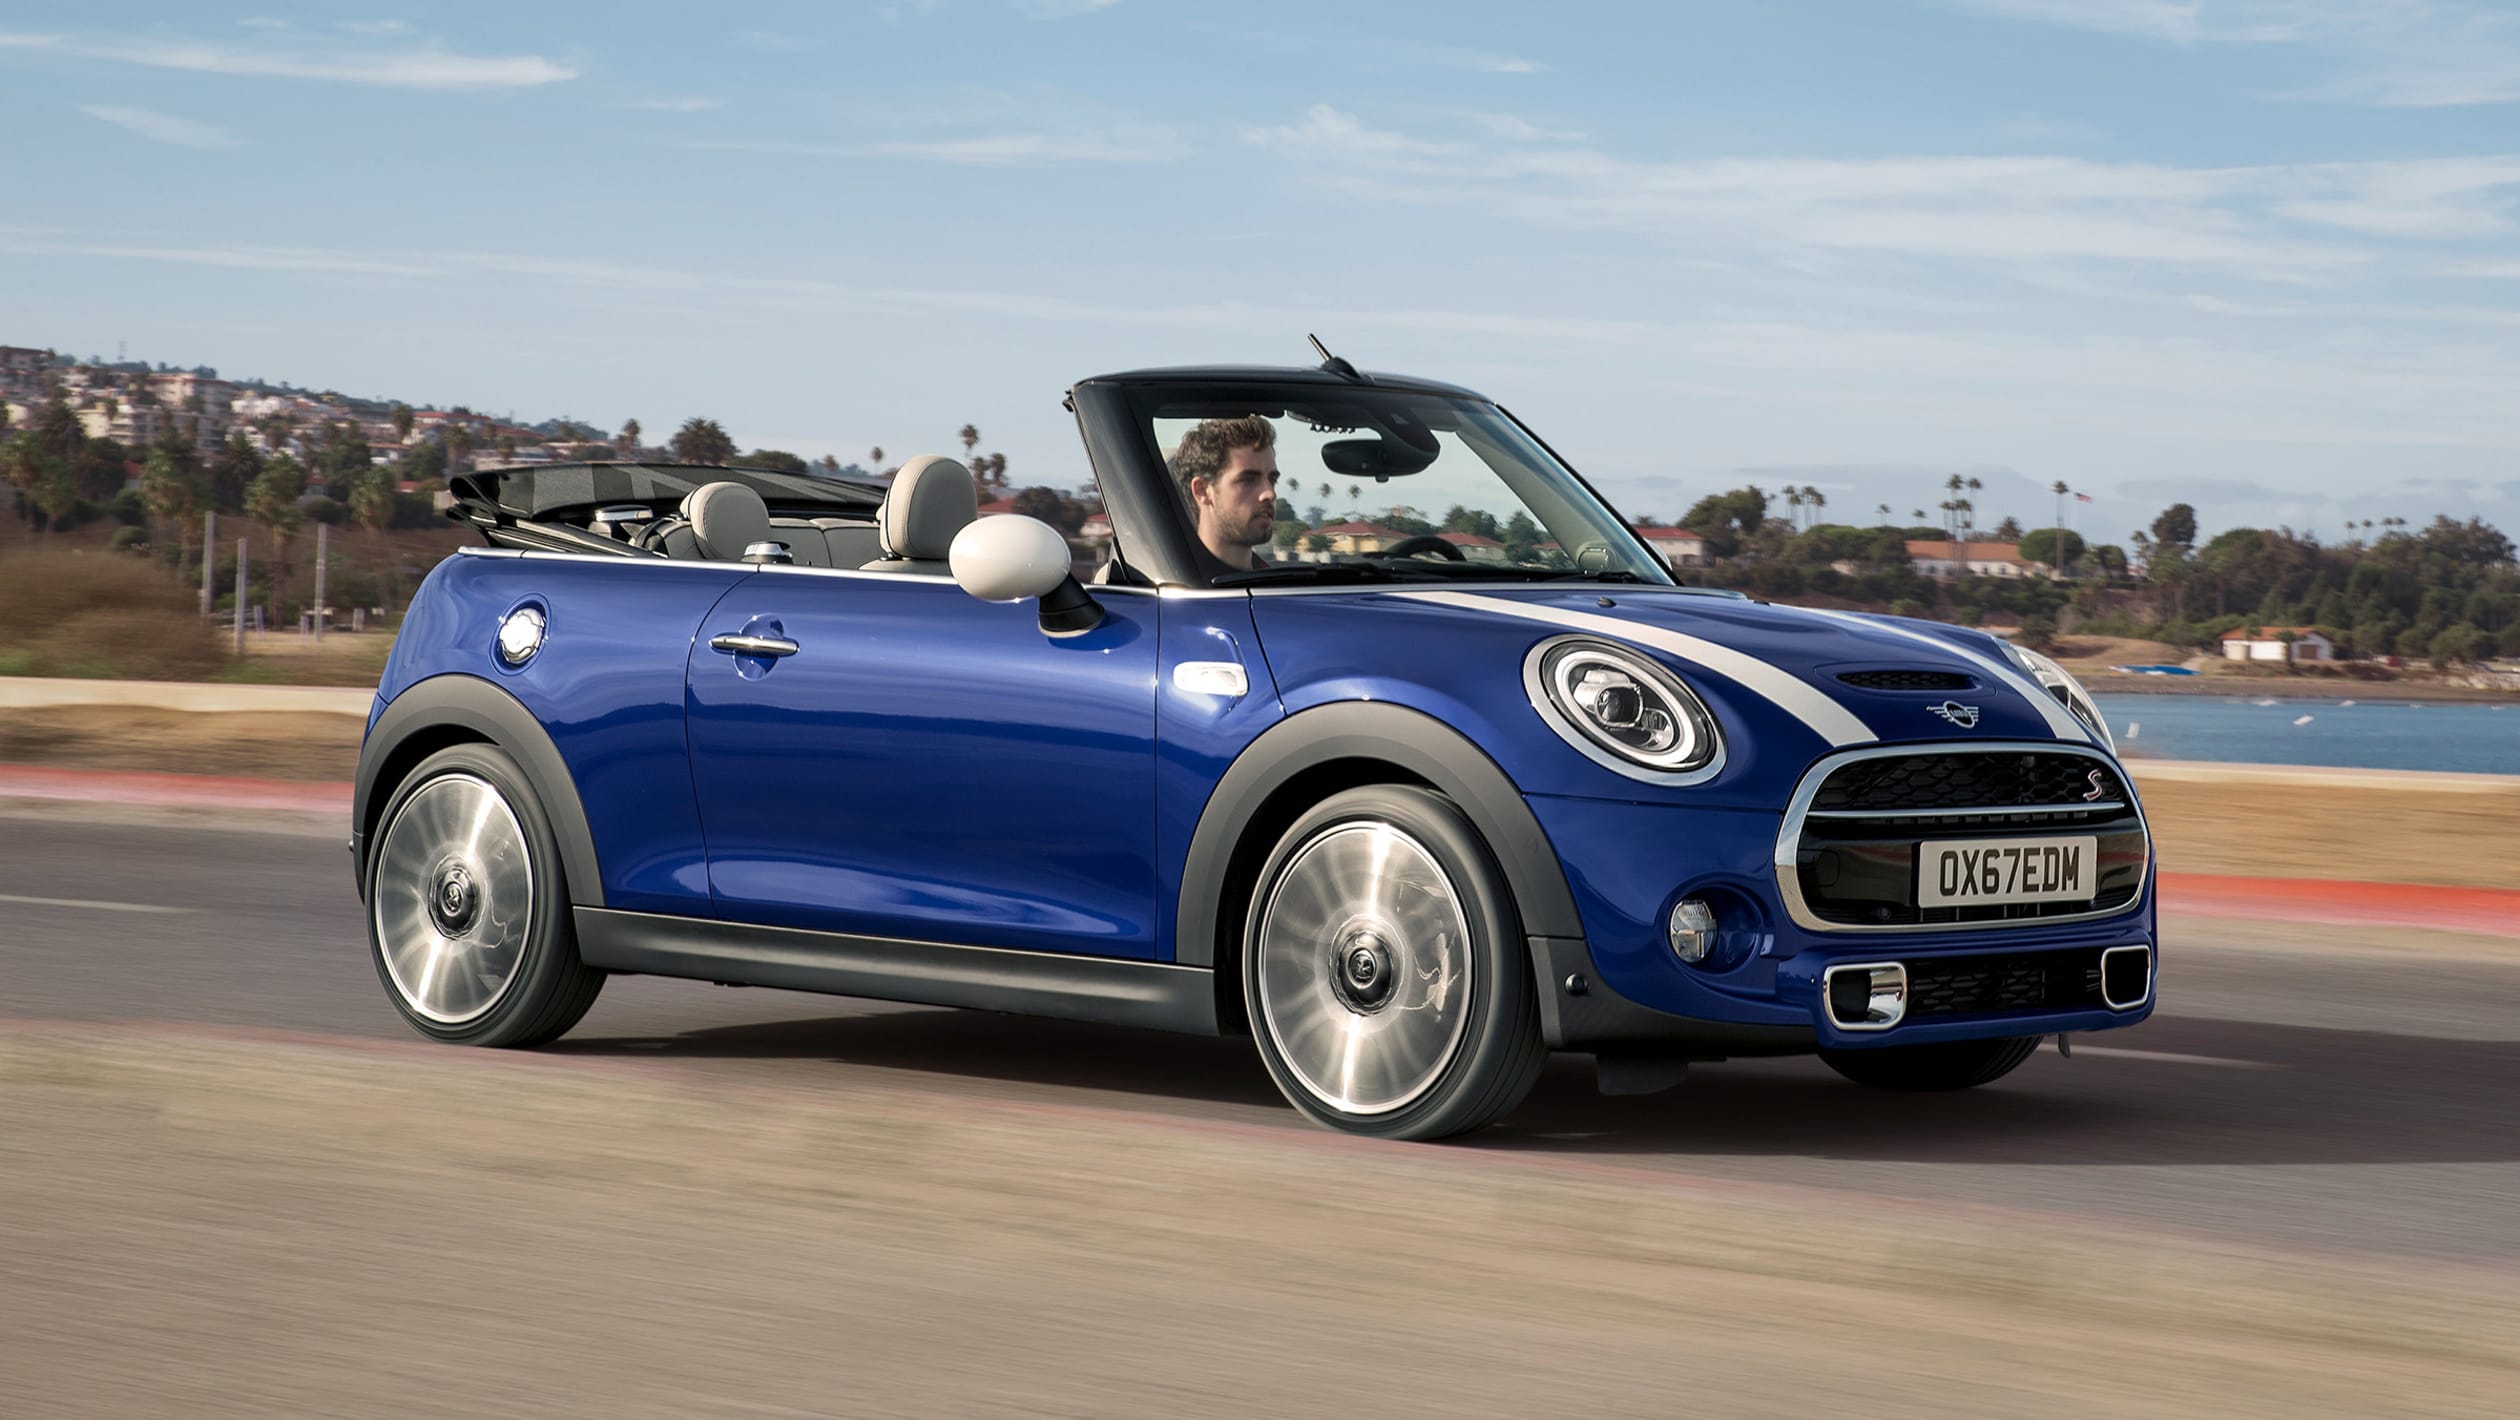 MINI hatch and Convertible facelifted for 2018 - pictures | Auto Express